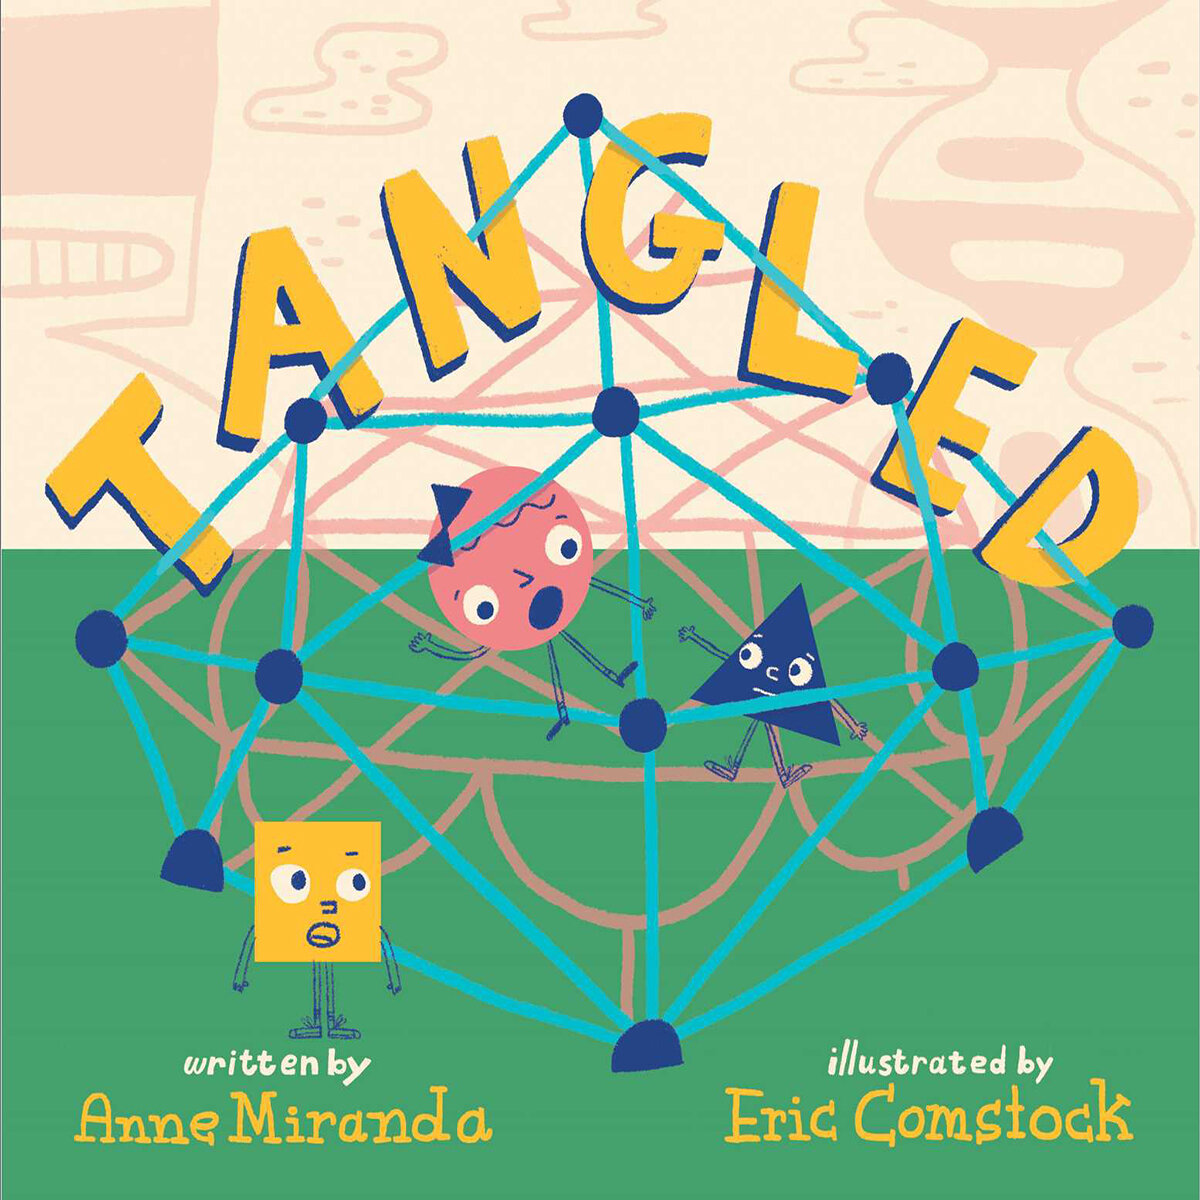 Tangled illustrated by Eric Comstock